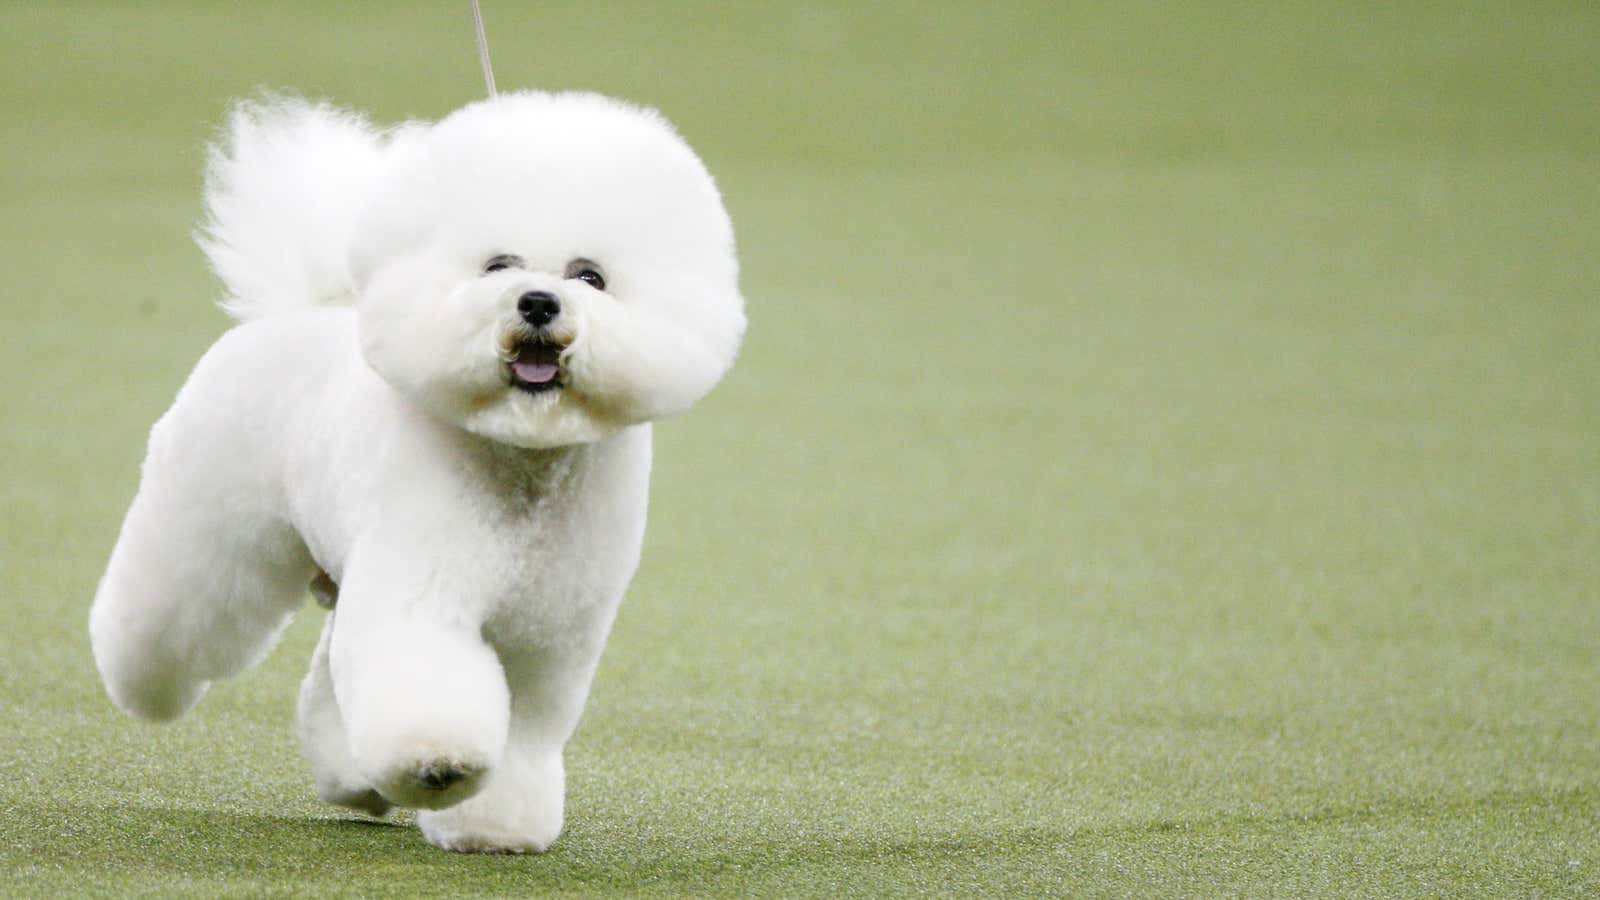 Meet Flynn, the bichon frise who took home last year’s “Best in Show” title